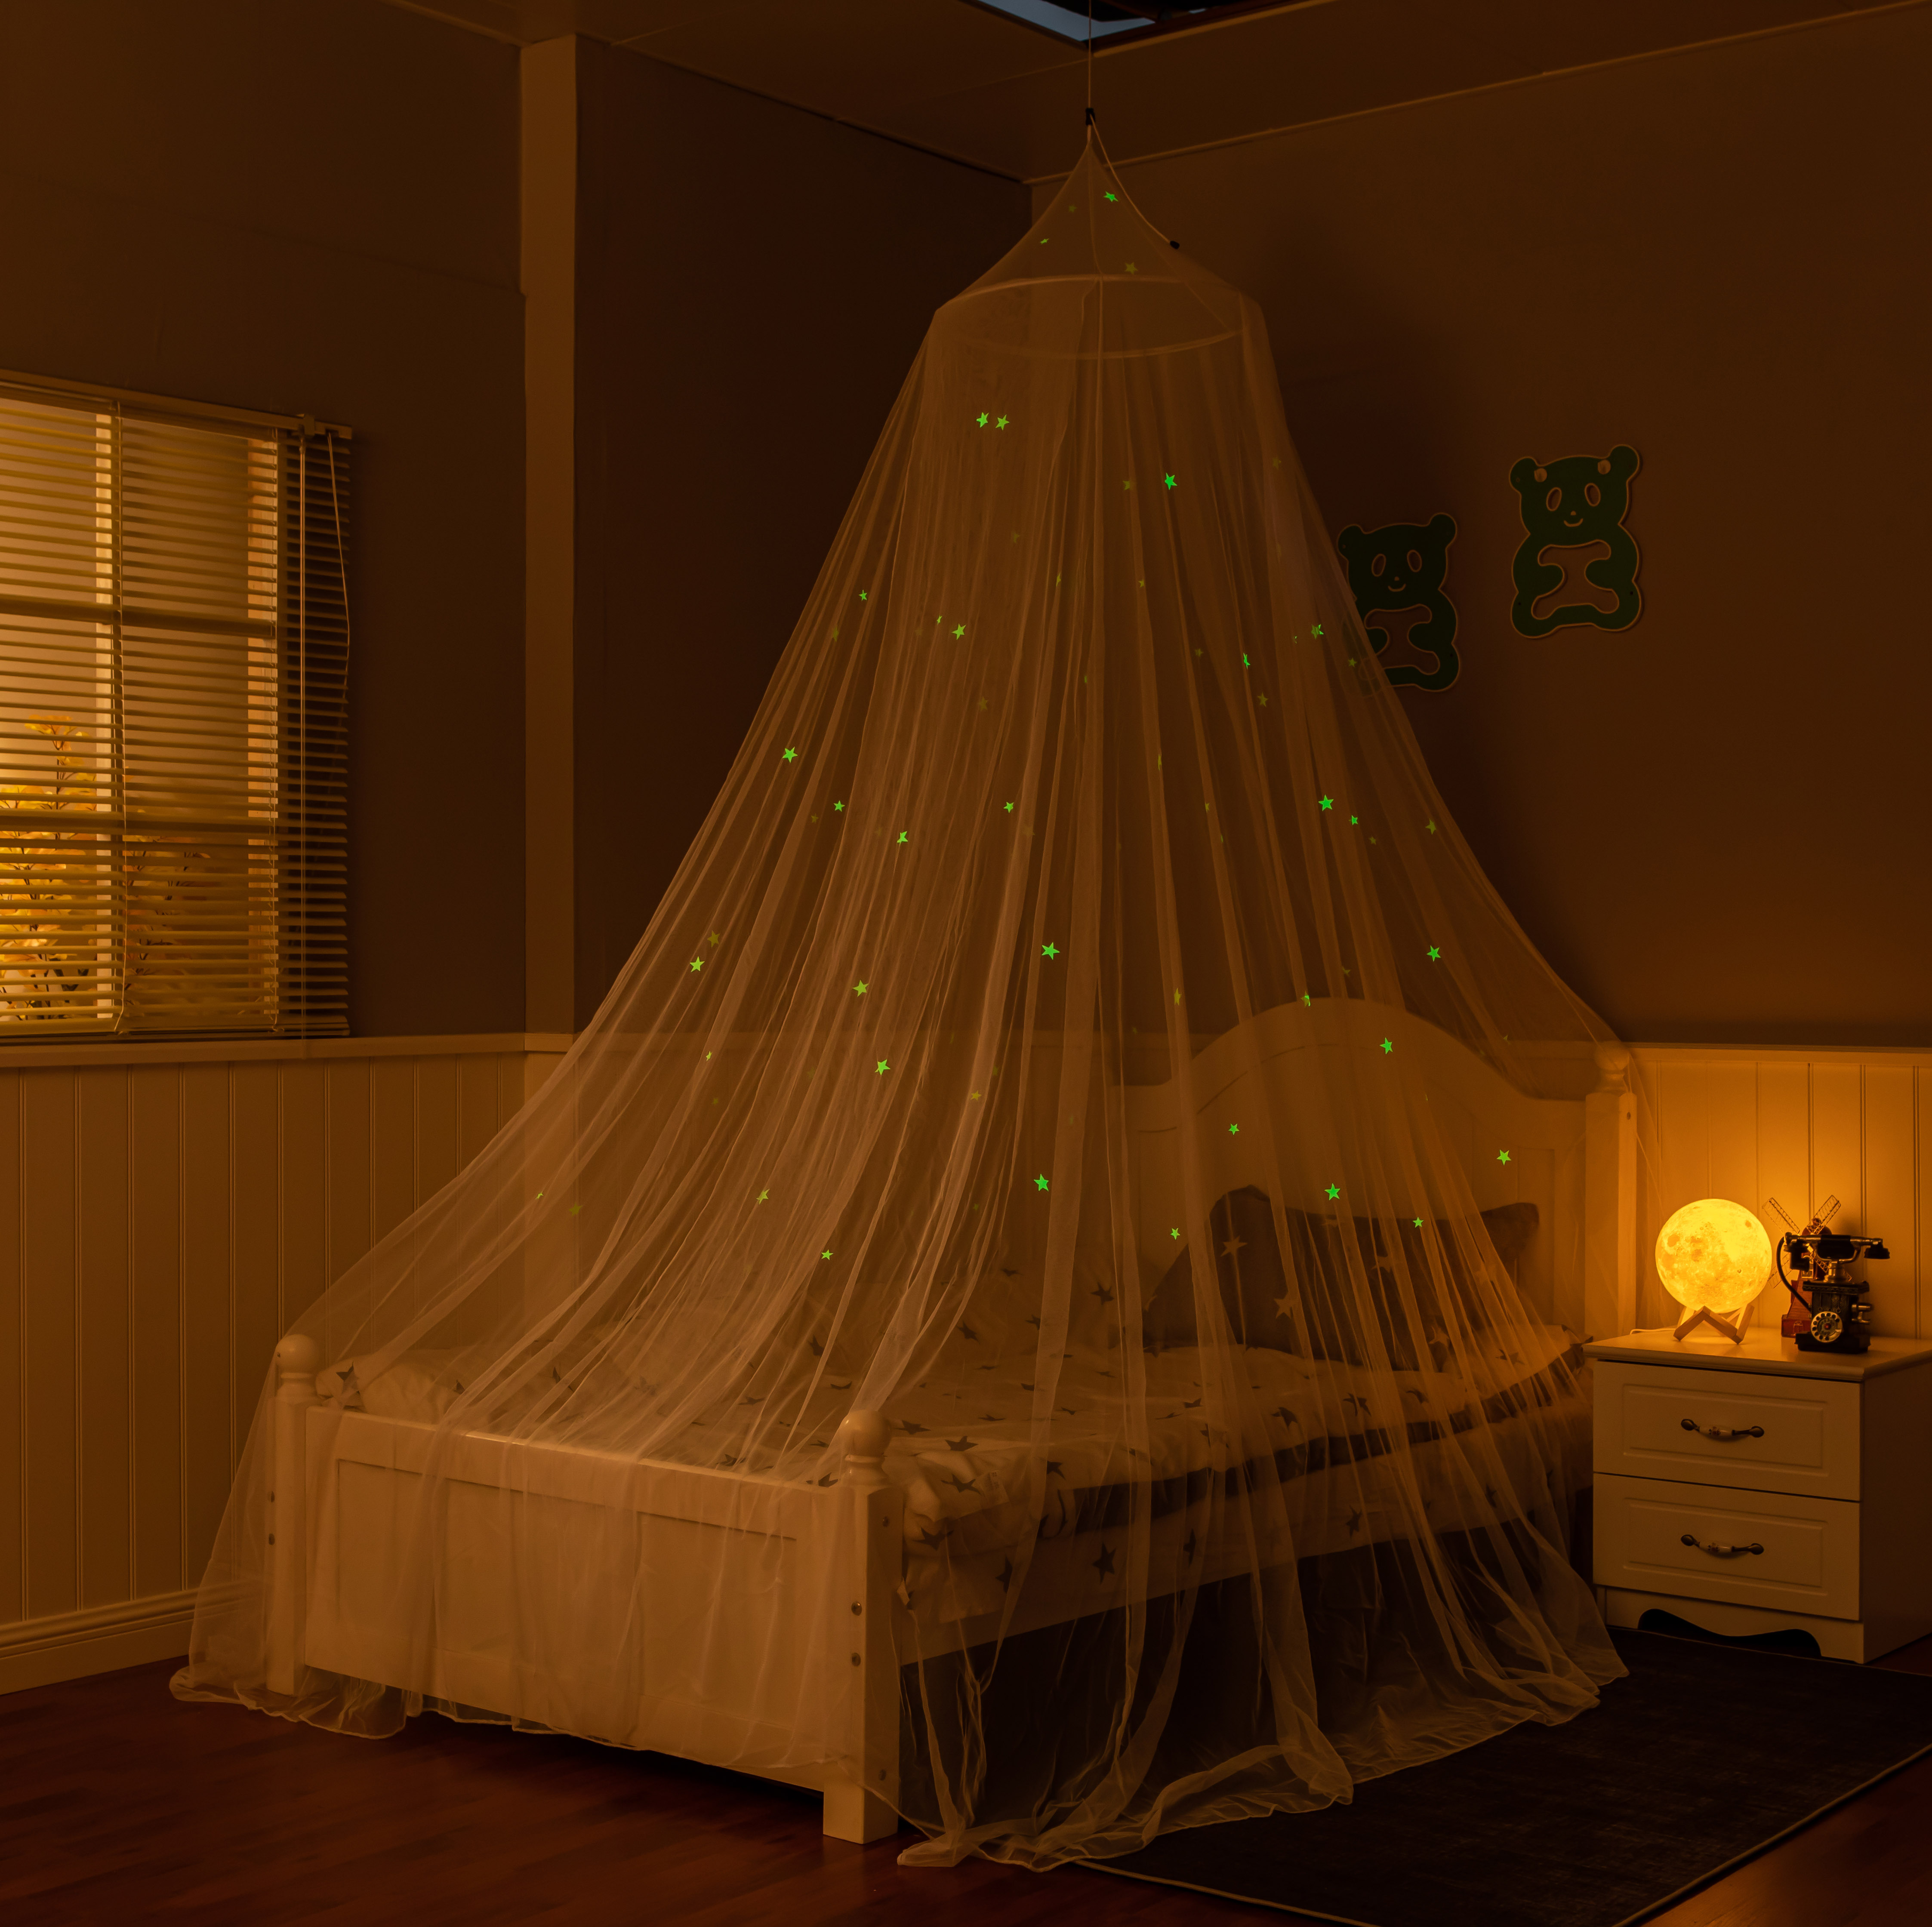 2022 Best Selling Glowing In The Dark Star Fantasy Hanging Mosquito Net for Bed